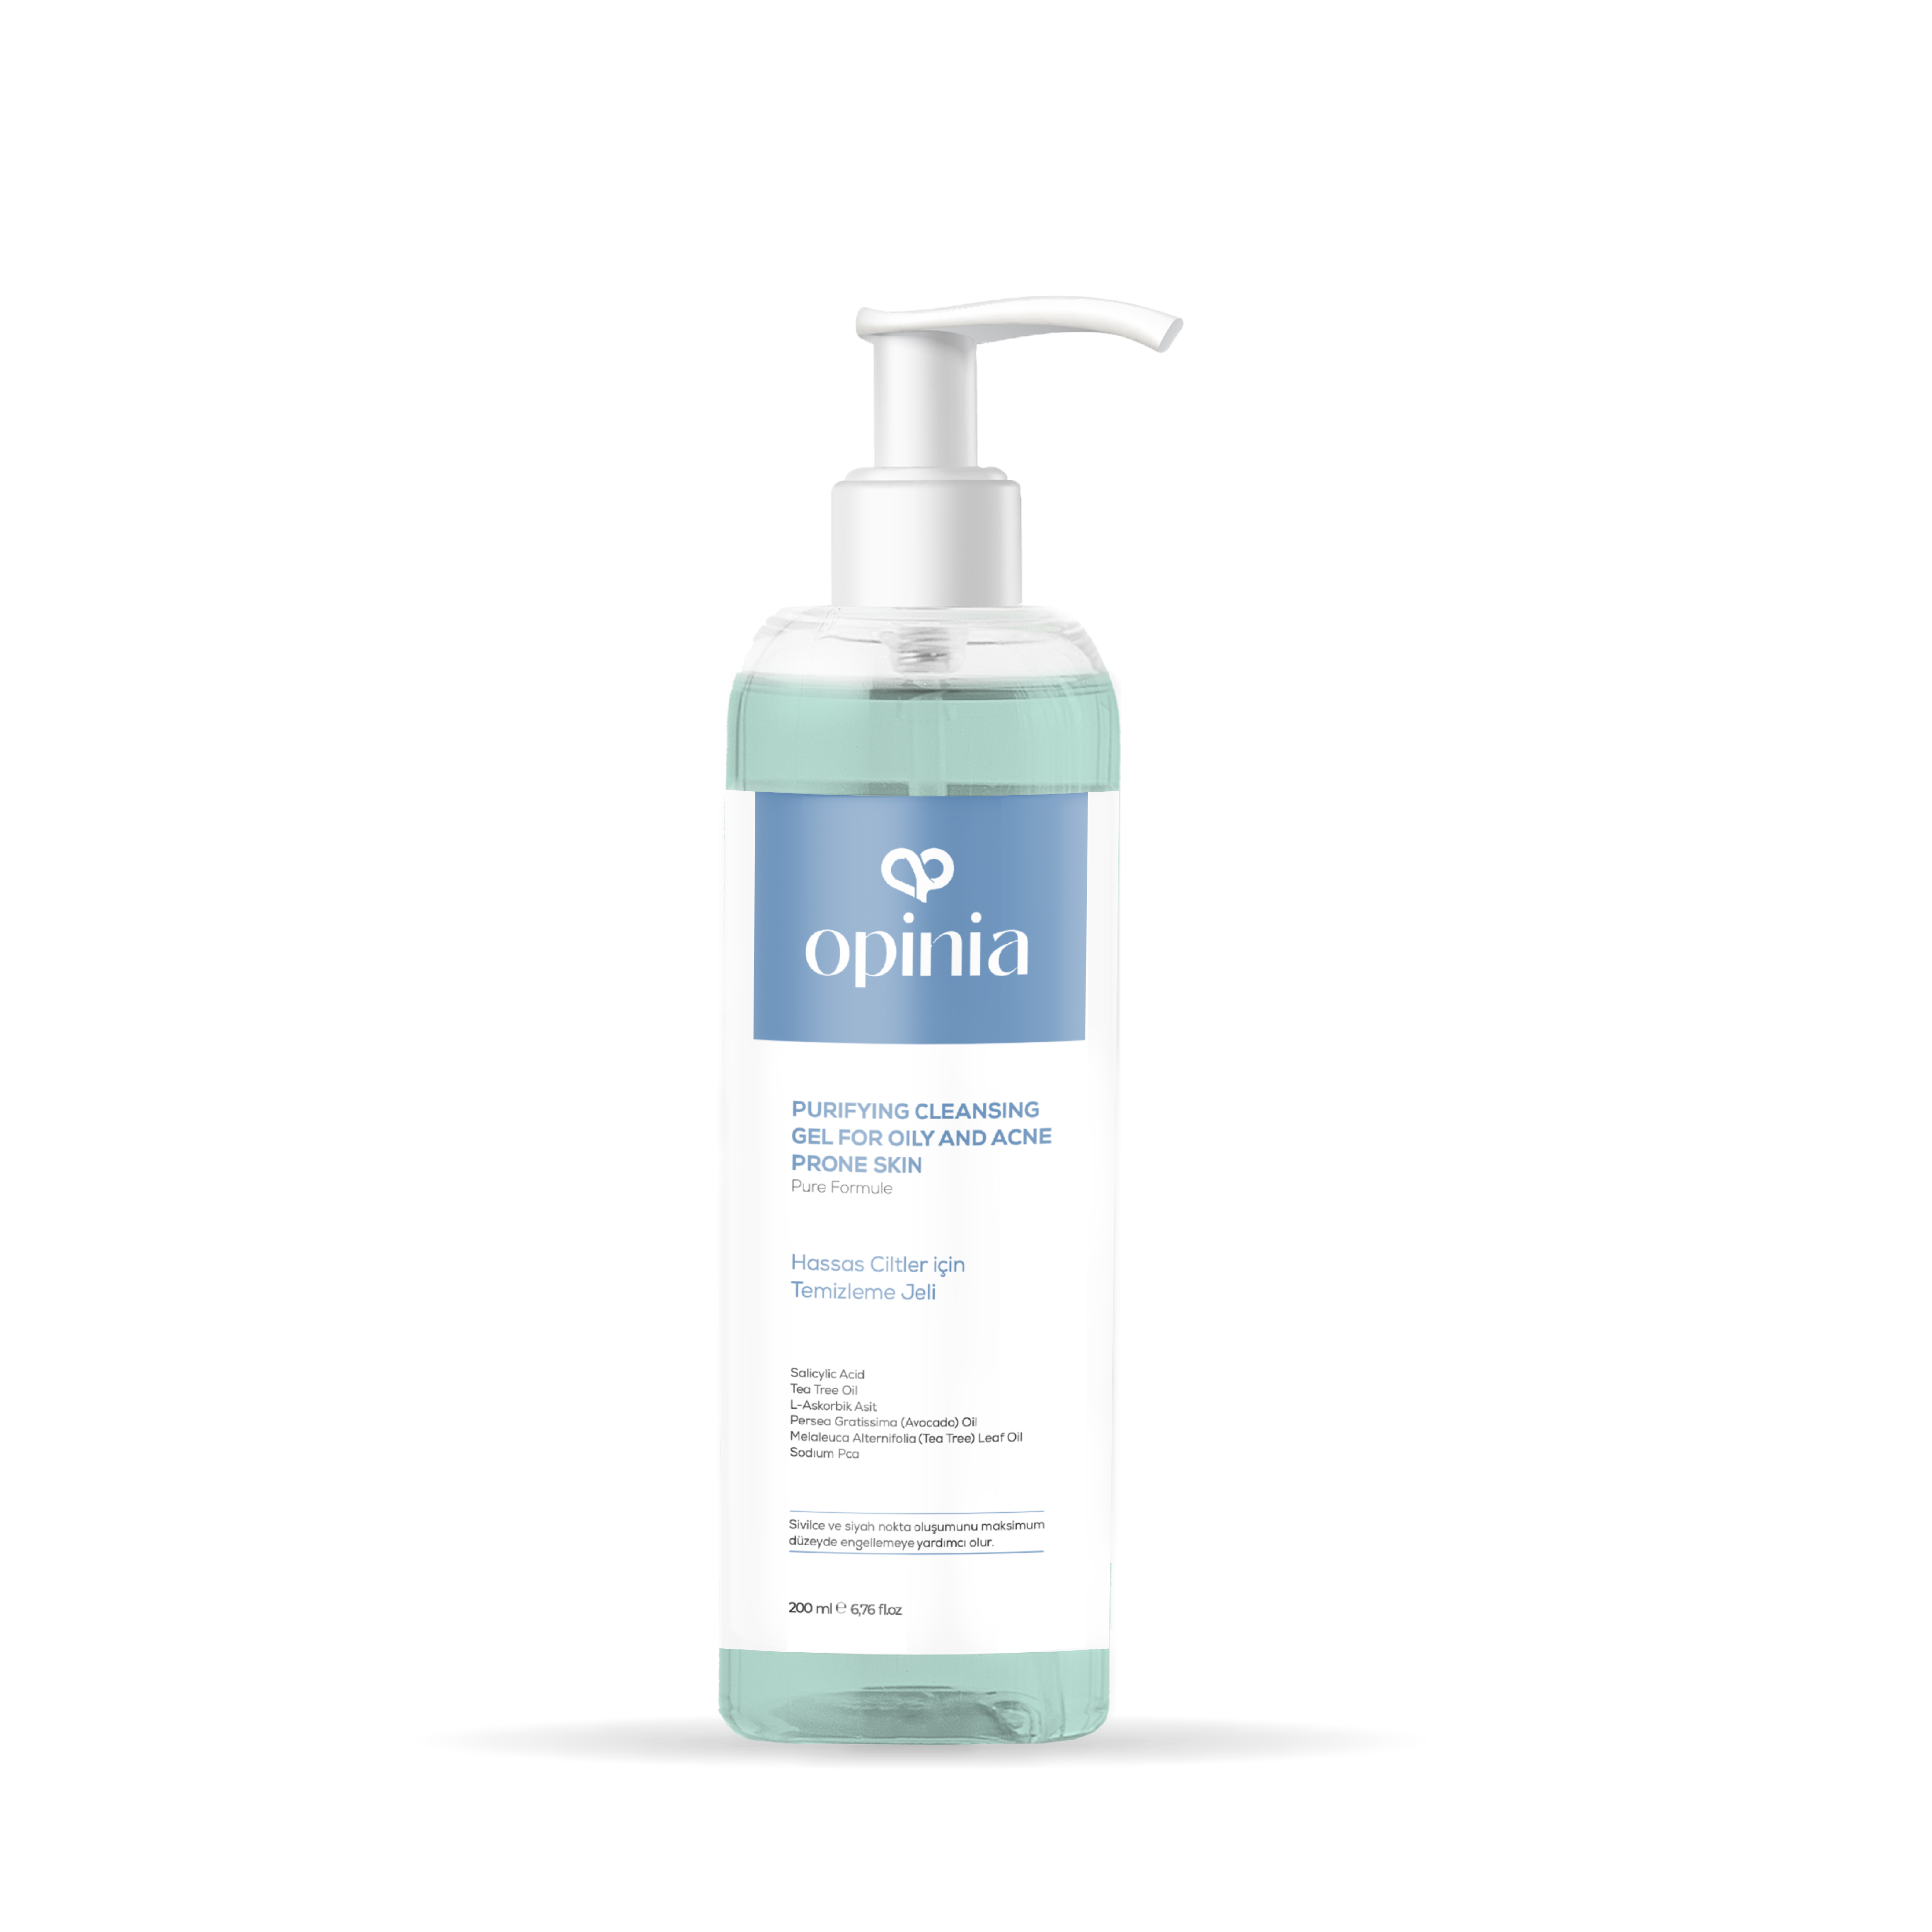 PURIFYING CLEANSING GEL FOR OILY AND ACNE PRONE SKIN